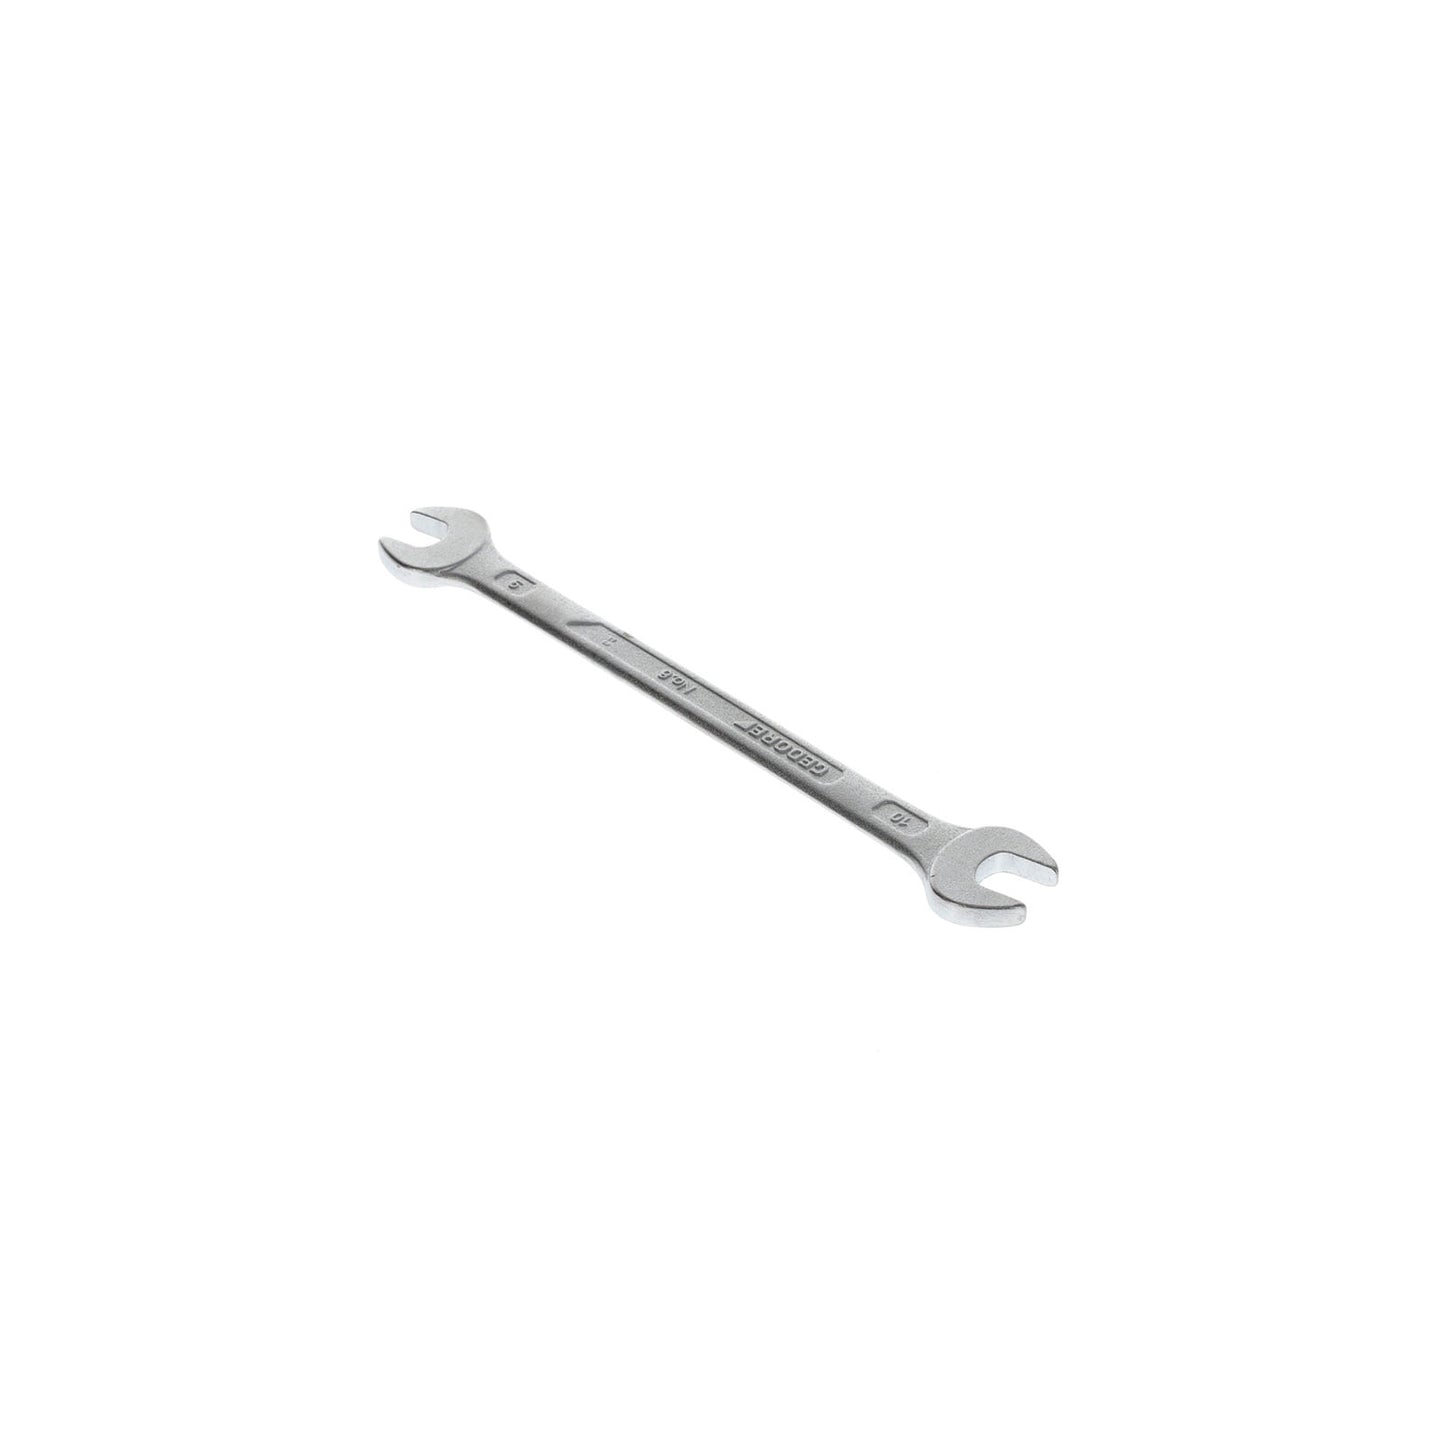 GEDORE 6 9X10 - 2-Mount Fixed Wrench, 9x10 (6064560)